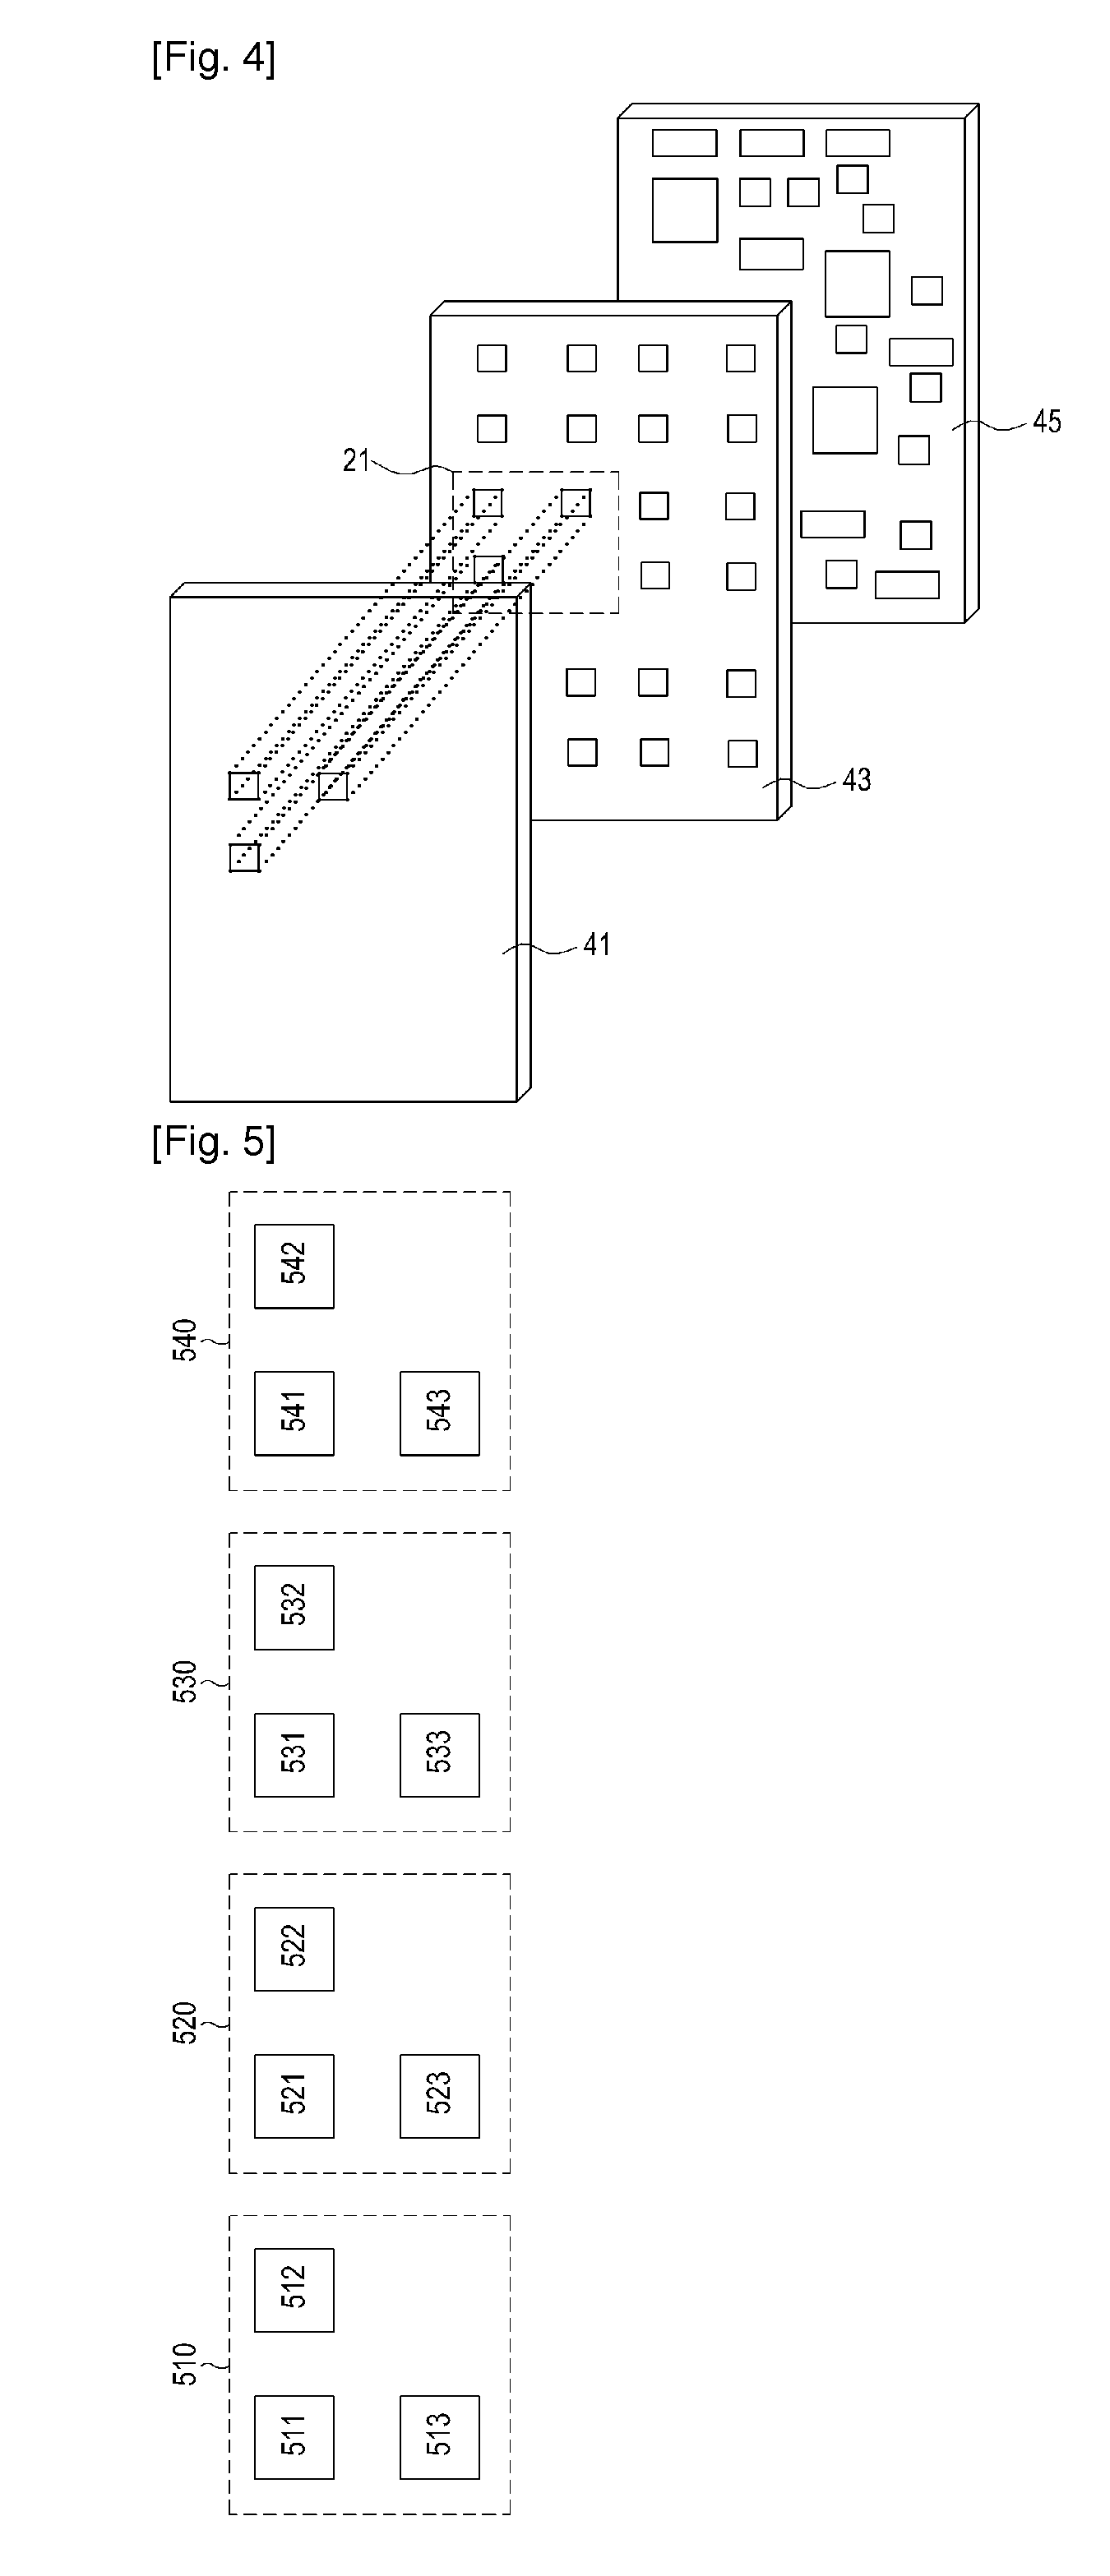 Apparatus for receiving and transmitting optical information